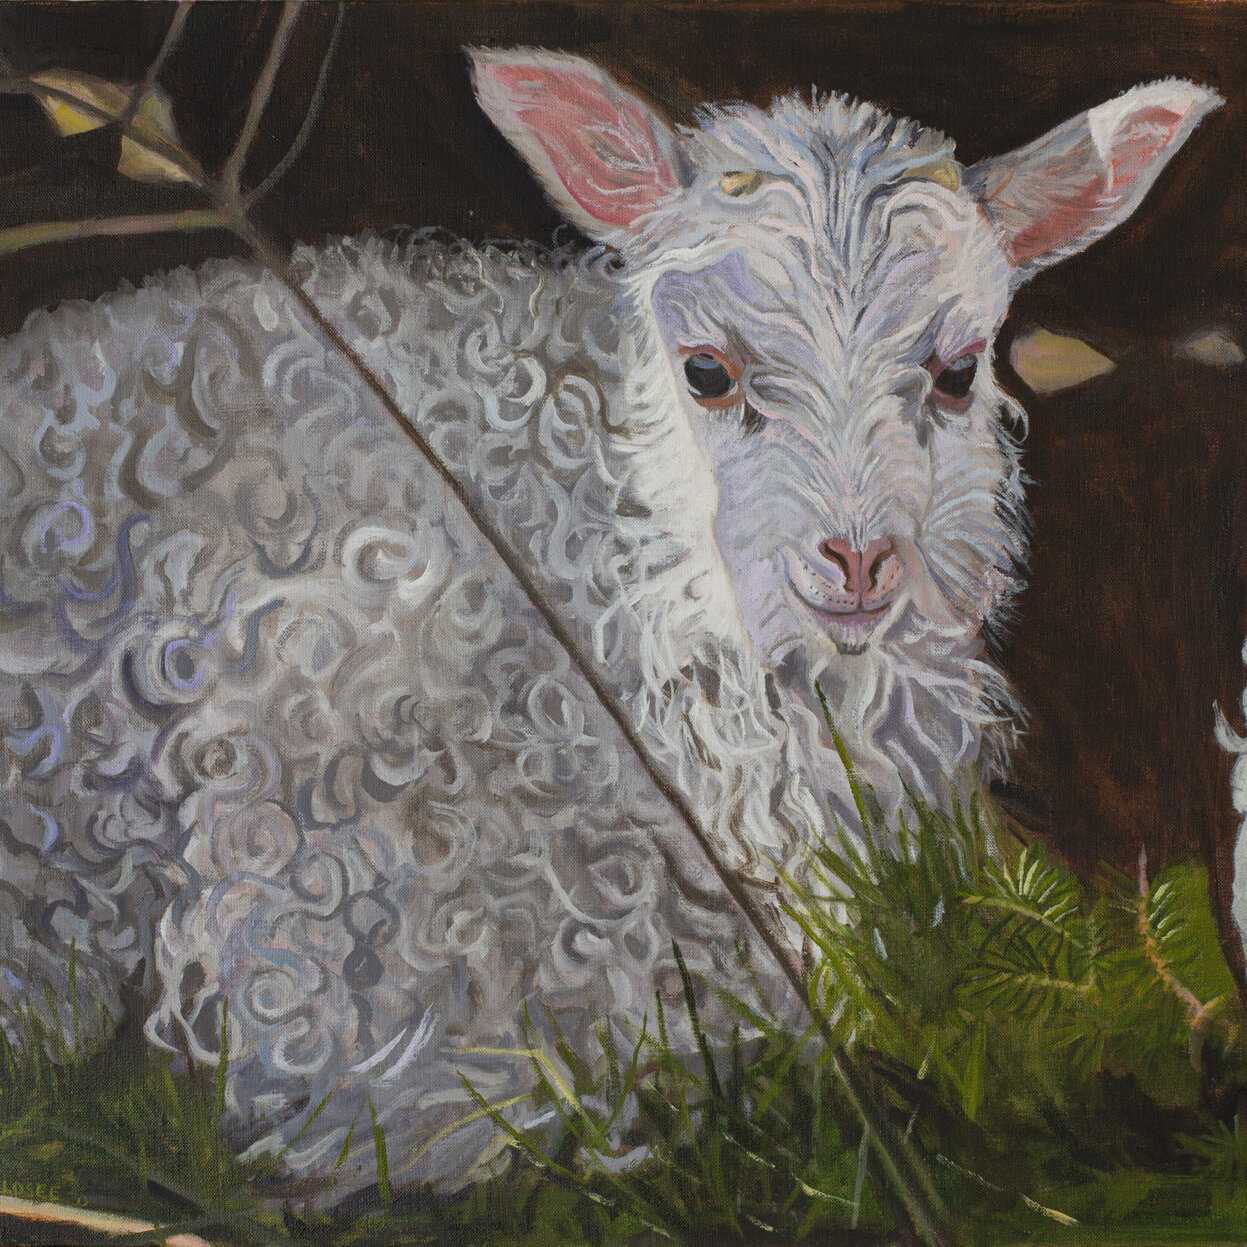 Painting of an Adorable Spring Lamb